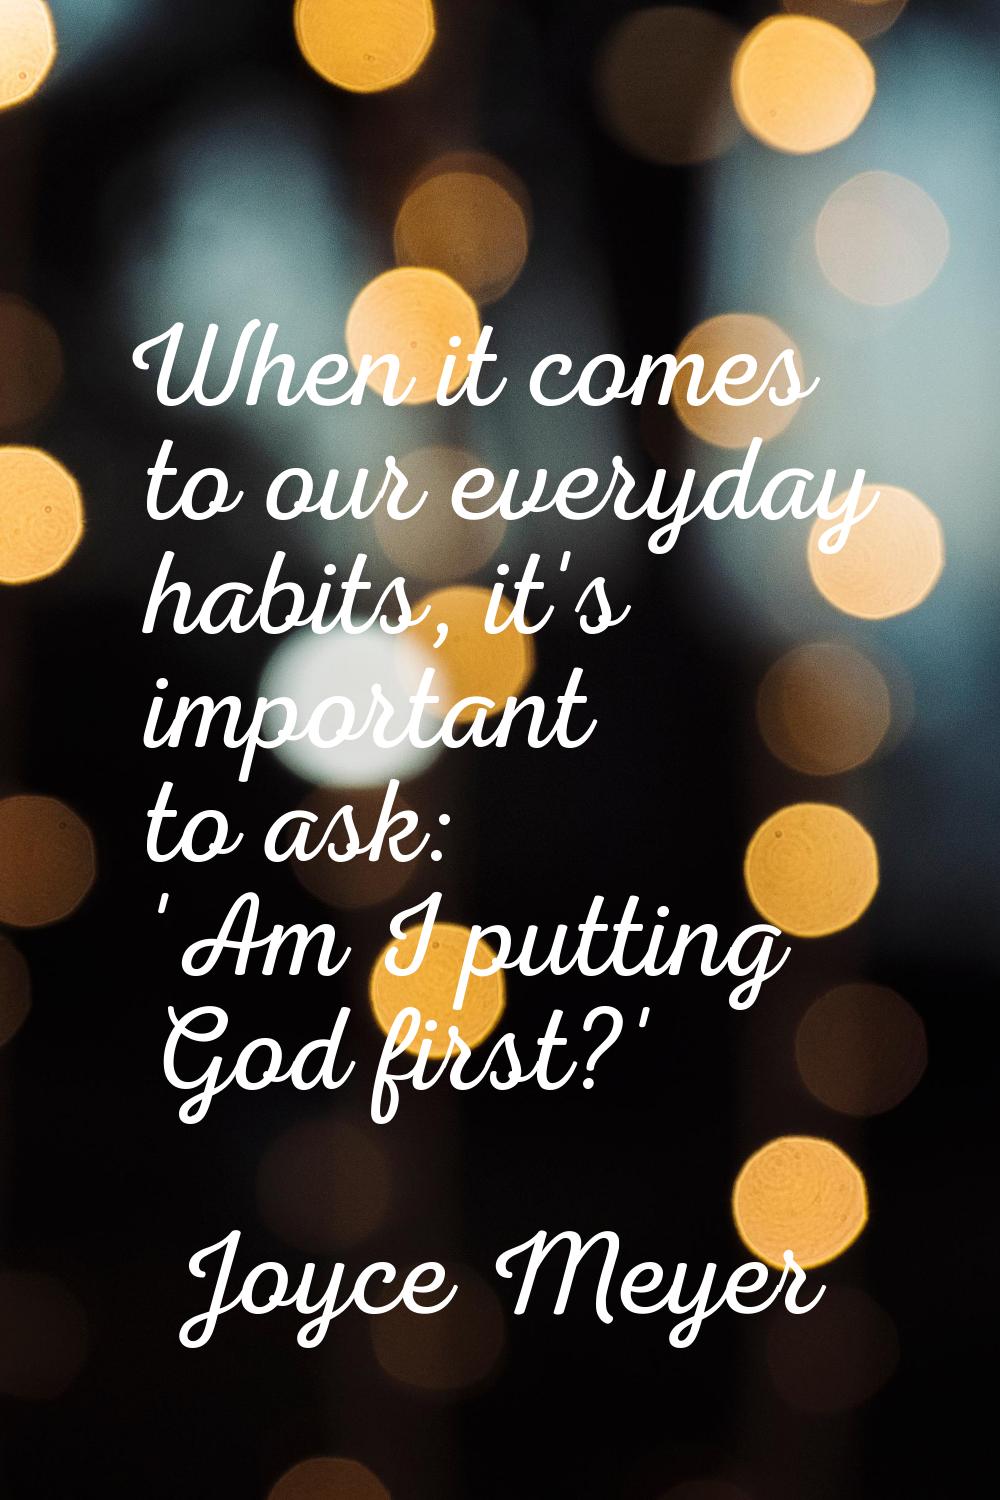 When it comes to our everyday habits, it's important to ask: 'Am I putting God first?'